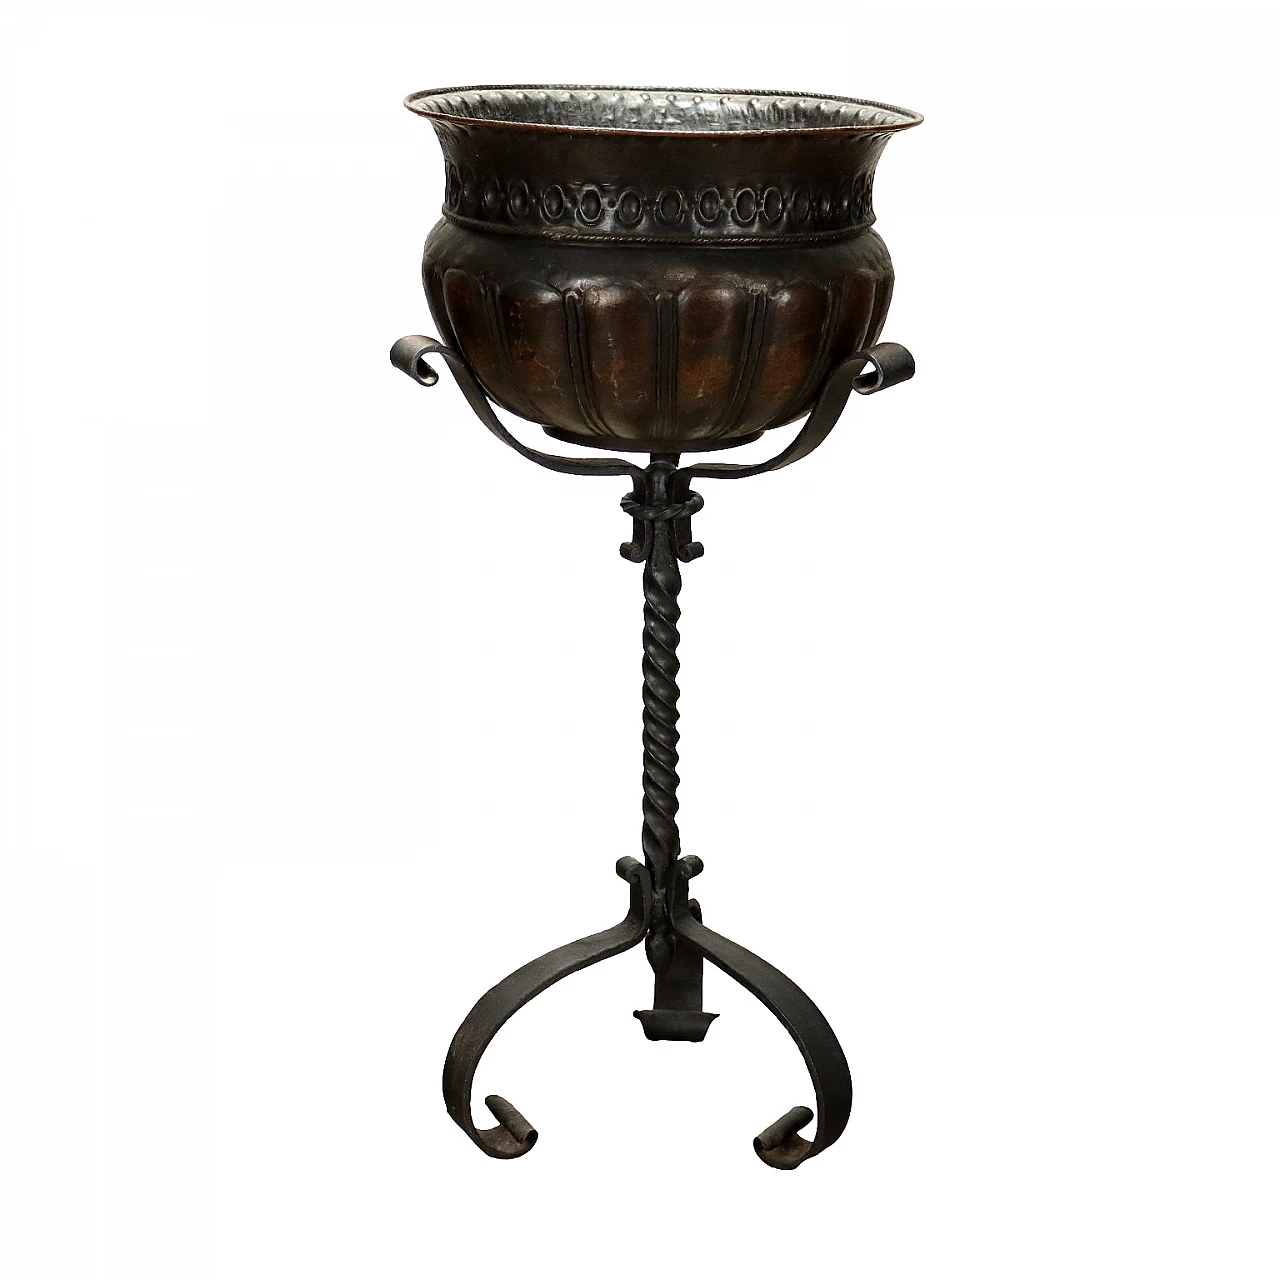 Wrought iron planter with three curled feet, late 19th century 1